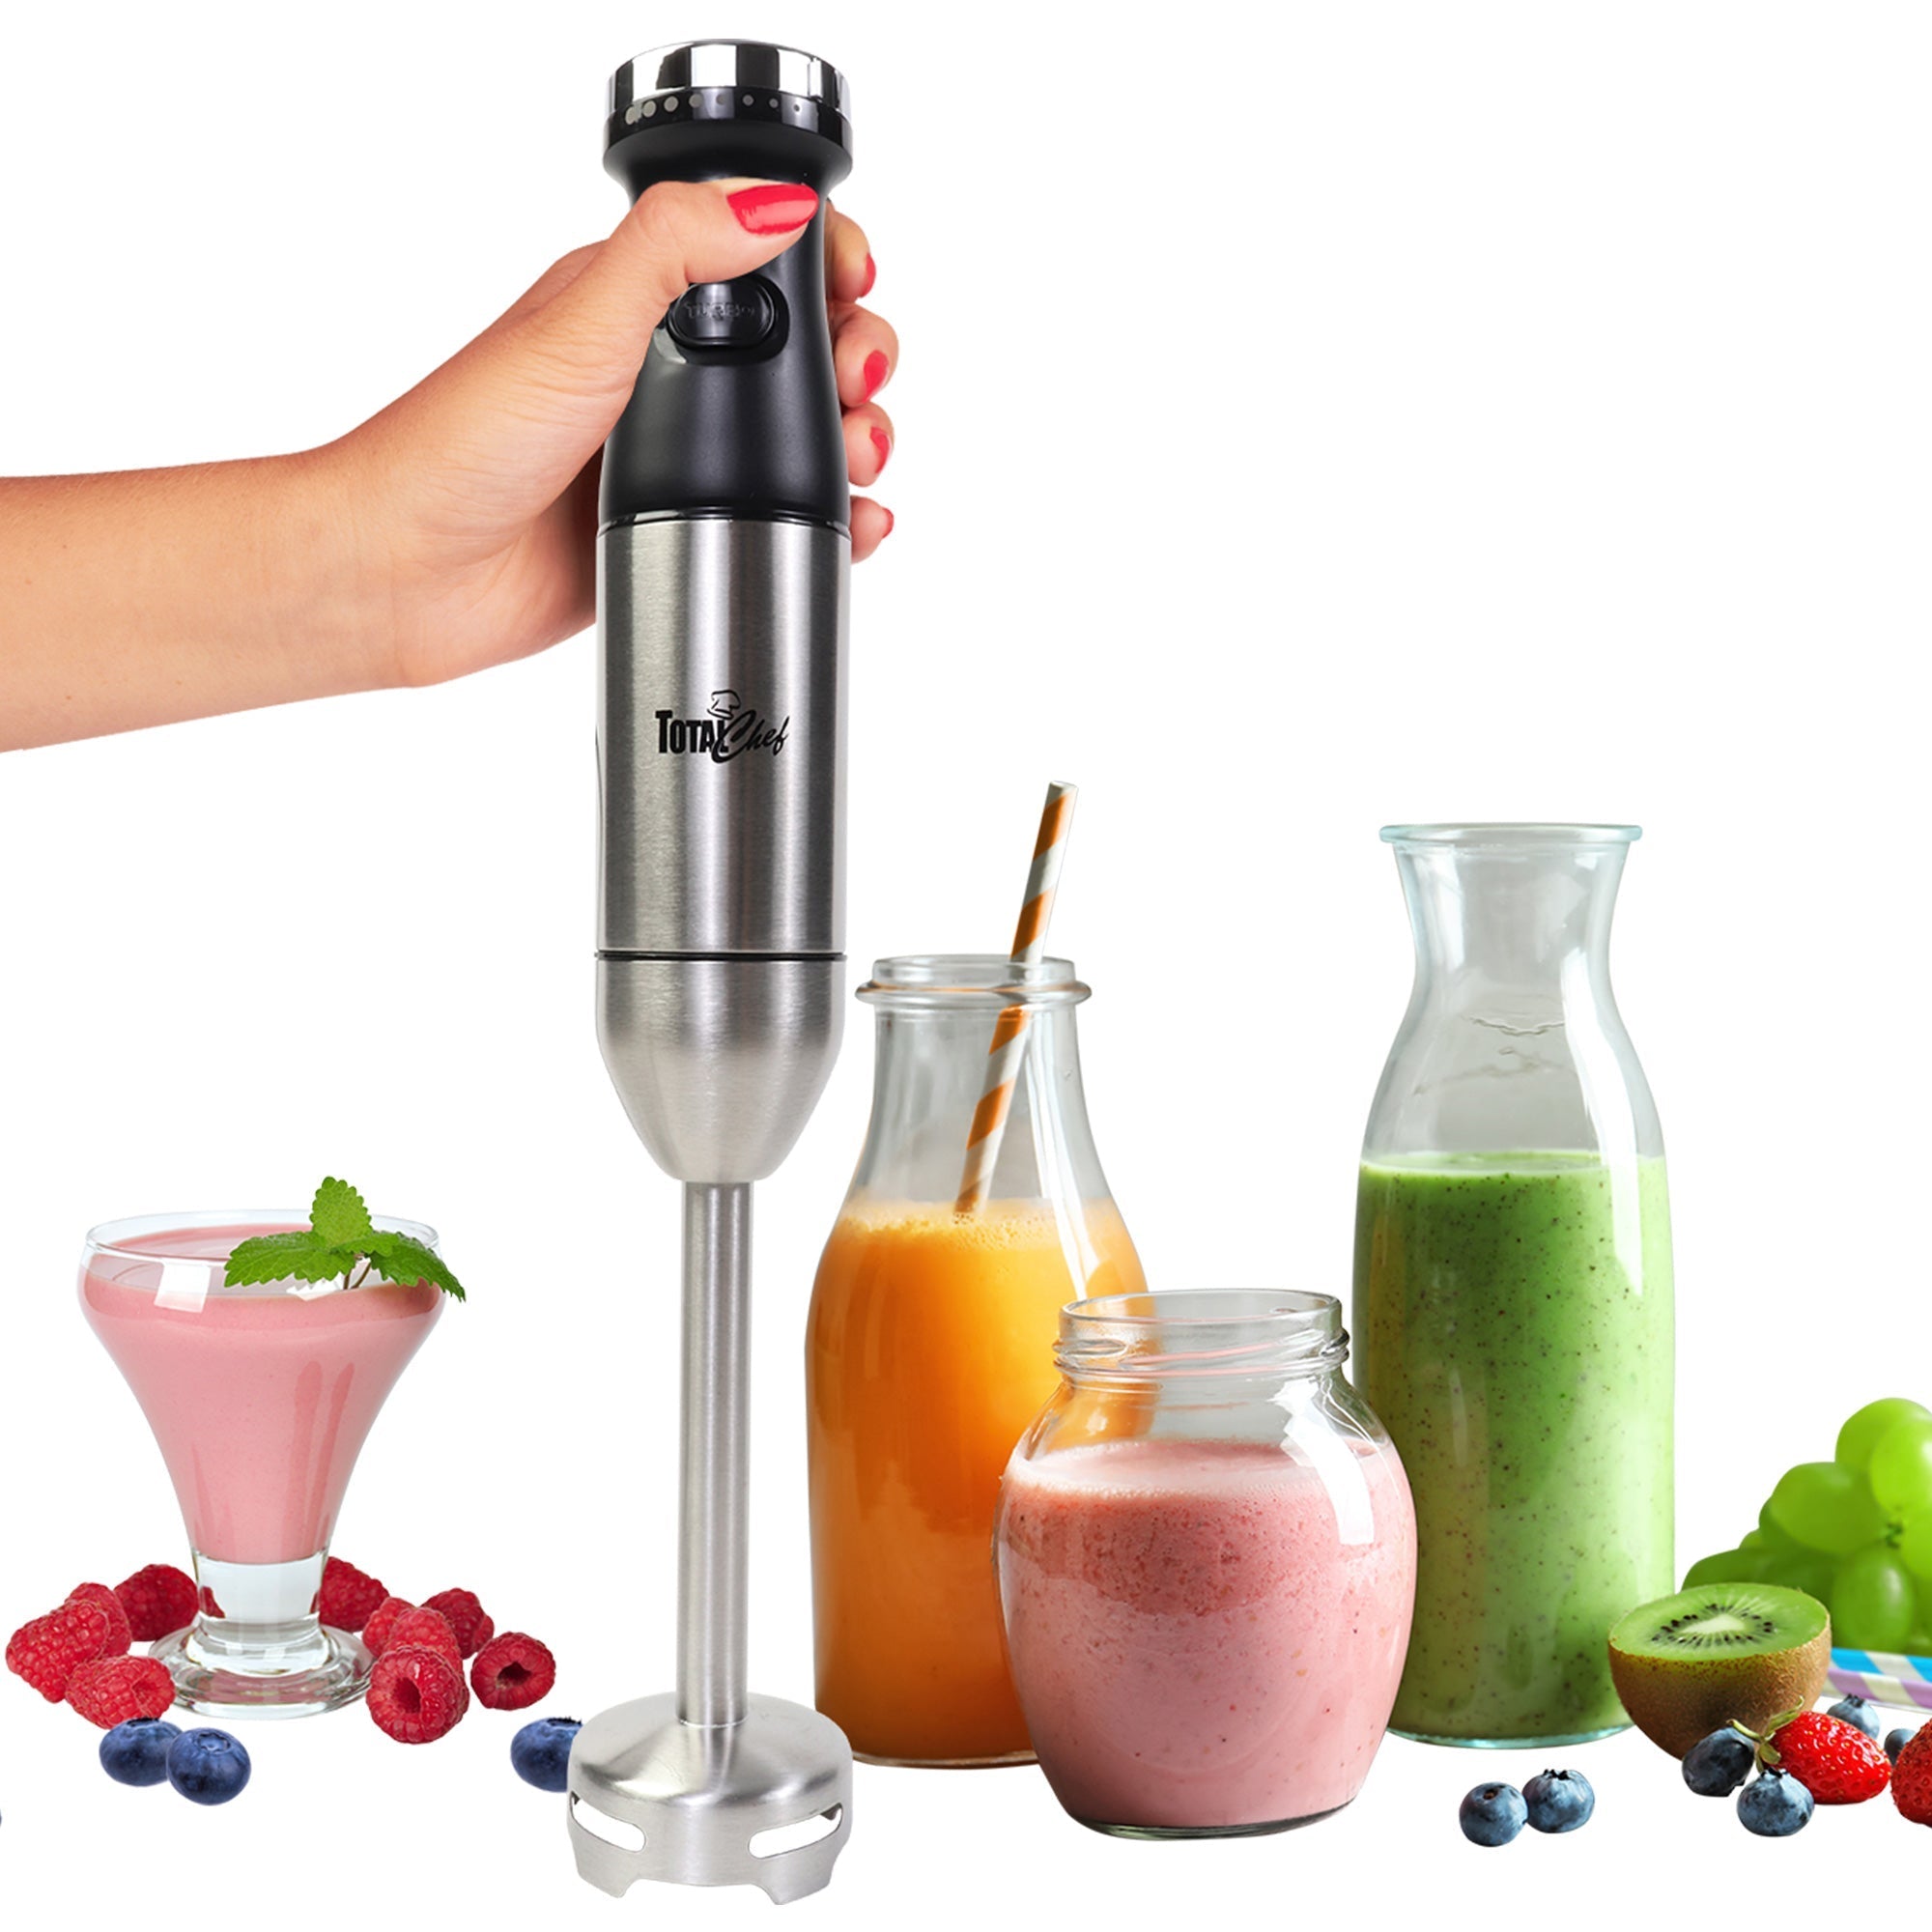 Product shot of hand holding blender upright surrounded by glasses and bottles of smoothies and shakes on a white background